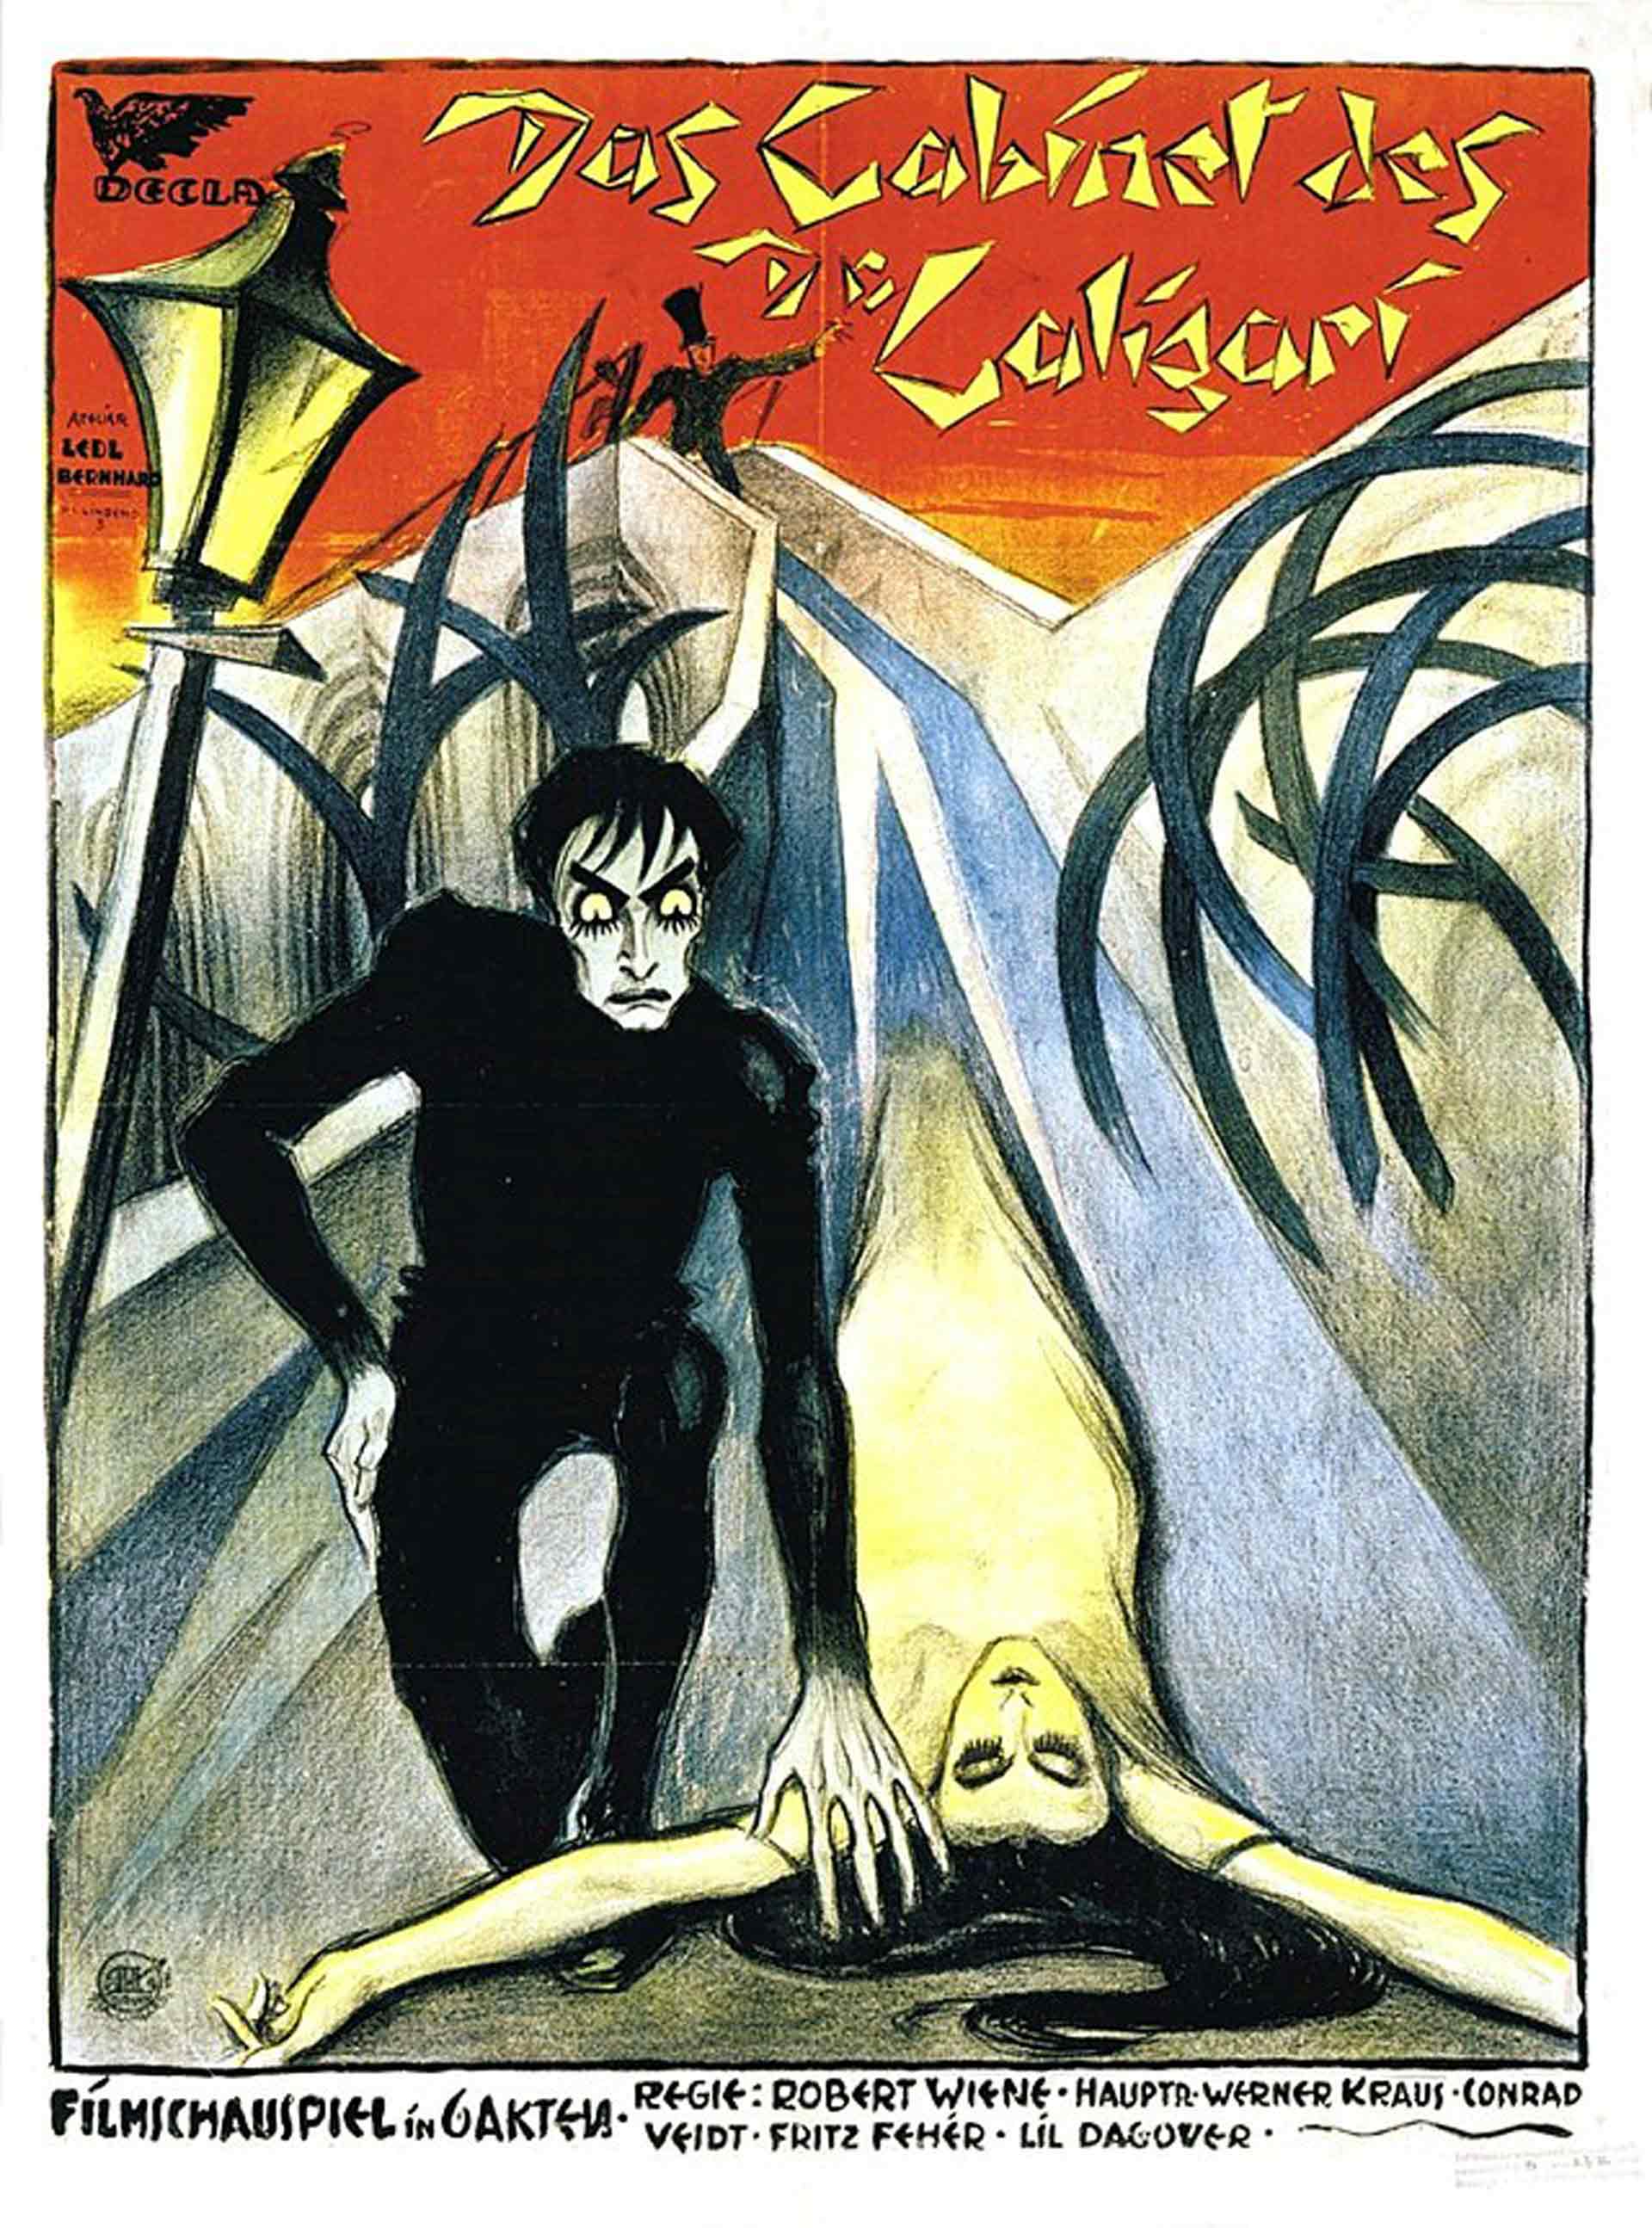 flyer with the movie title, Das Cabinet des Dr. Caligari, and full illustration of a man with black hair placing his hand on a woman